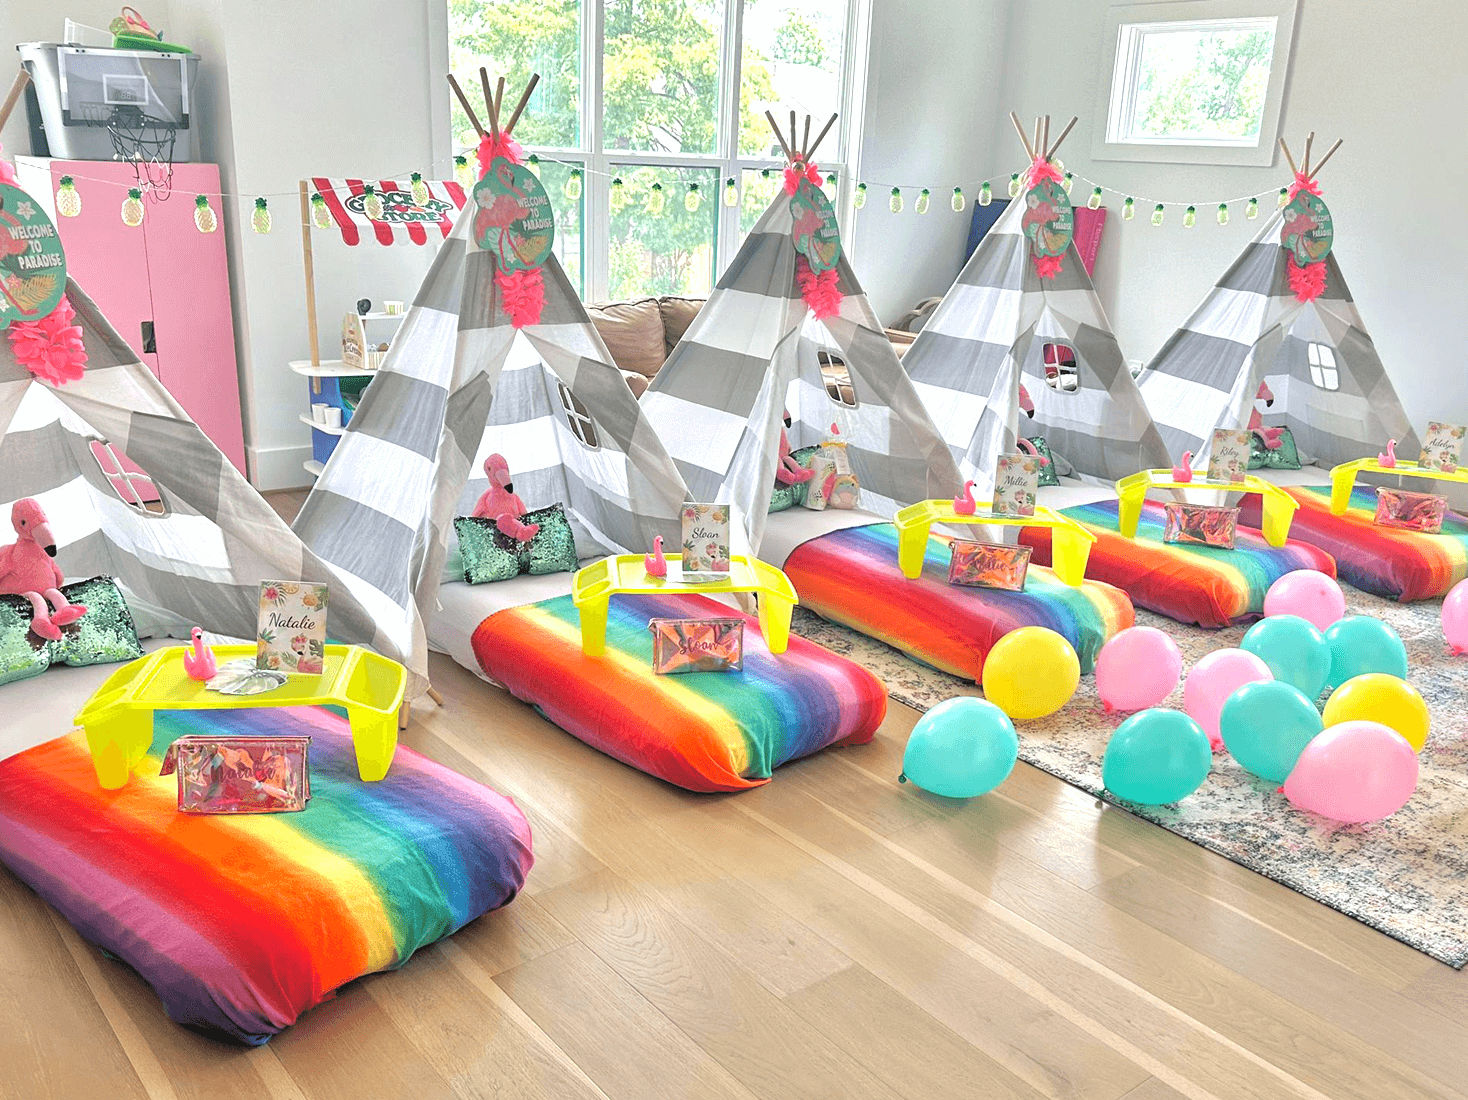 Slumber party and teepee party